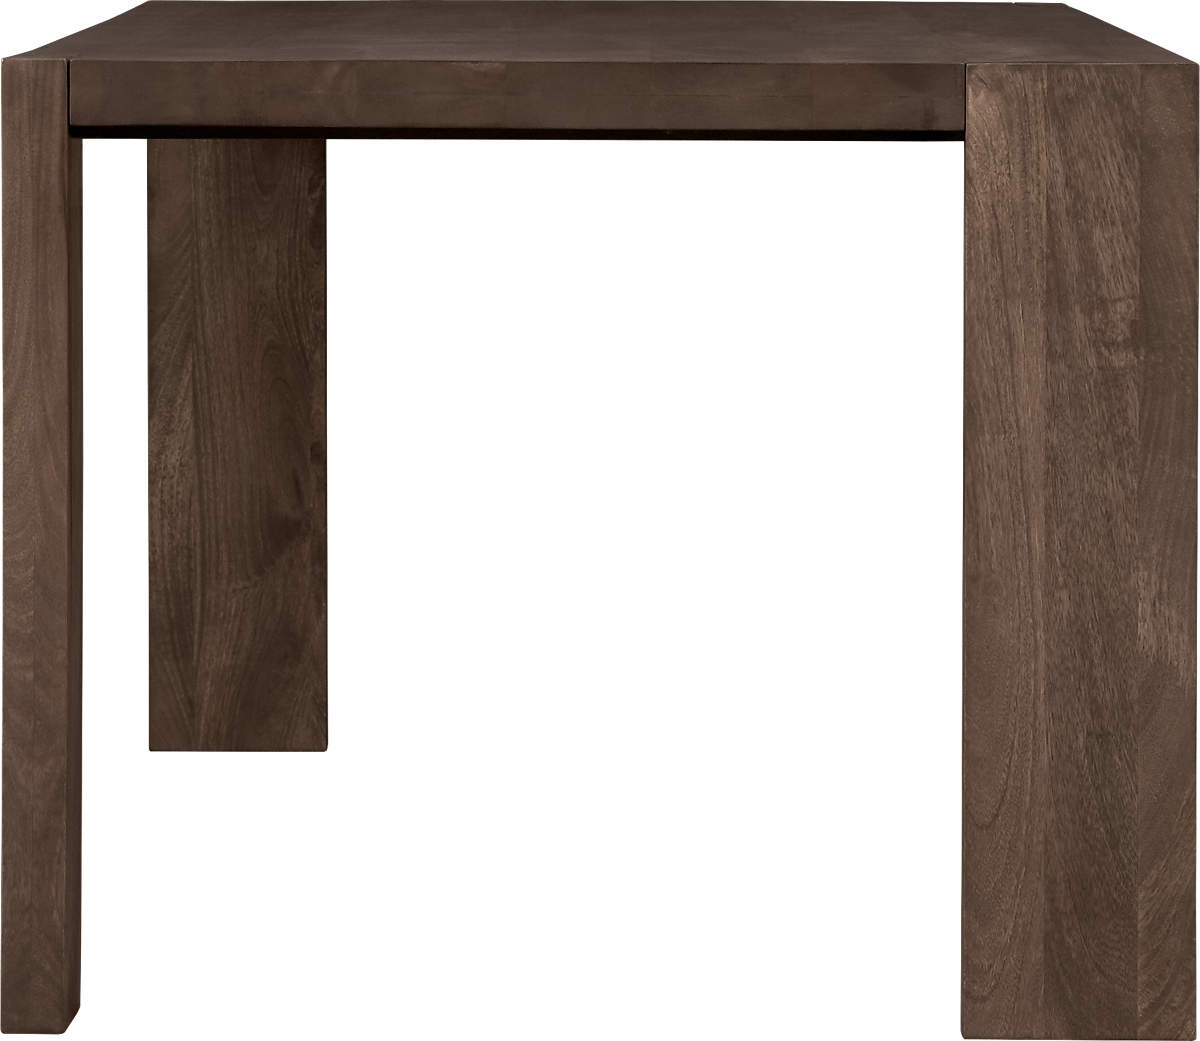 blox 35x91 dining table - Image 2